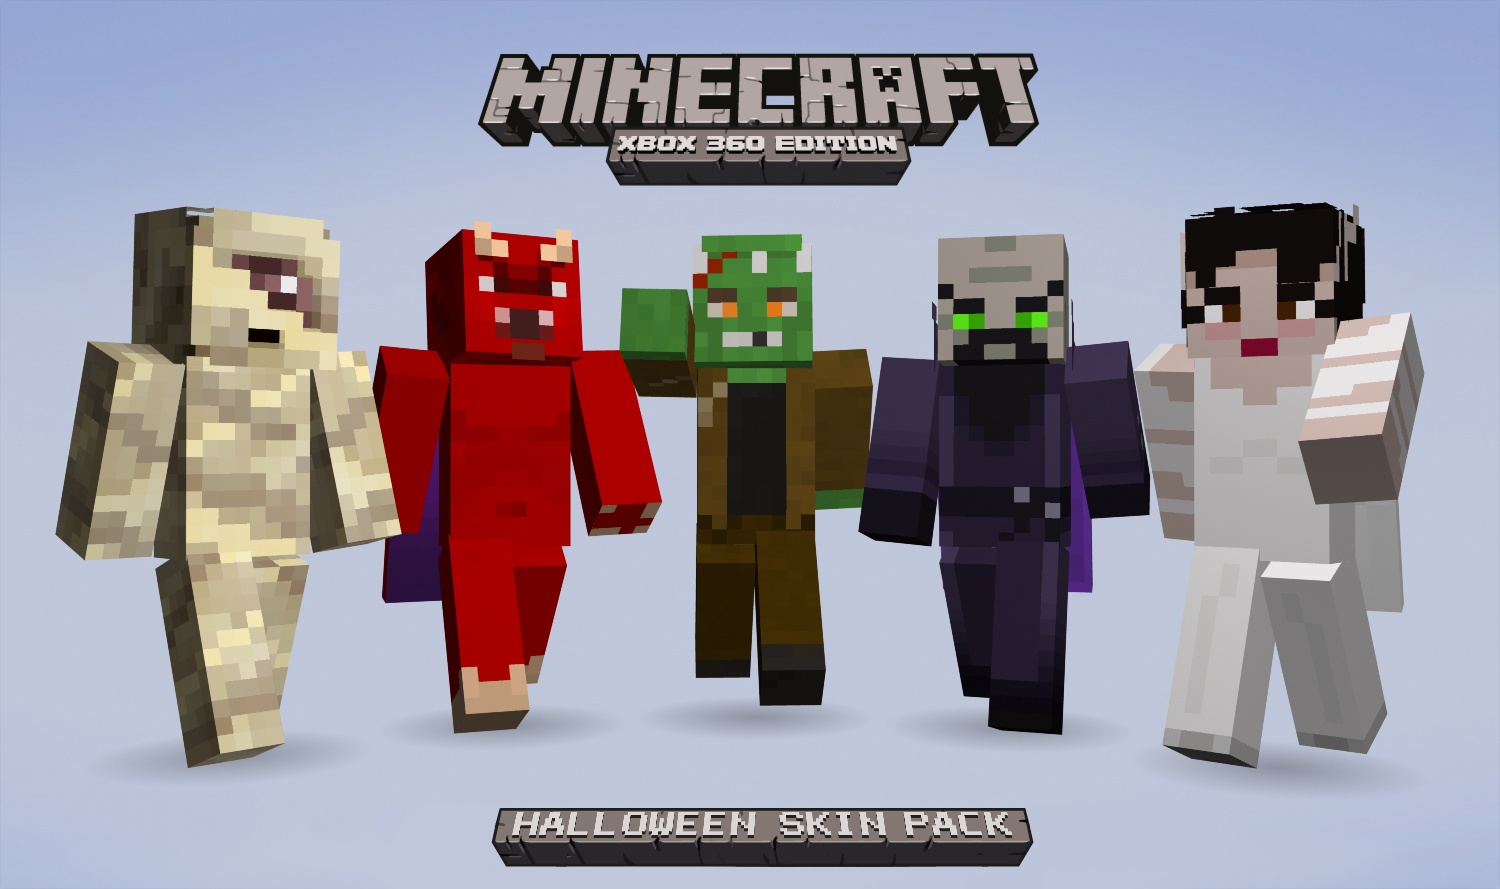 Minecraft: Xbox 360 Edition gets Trials Fusion skins as marketing continues  seeping into games